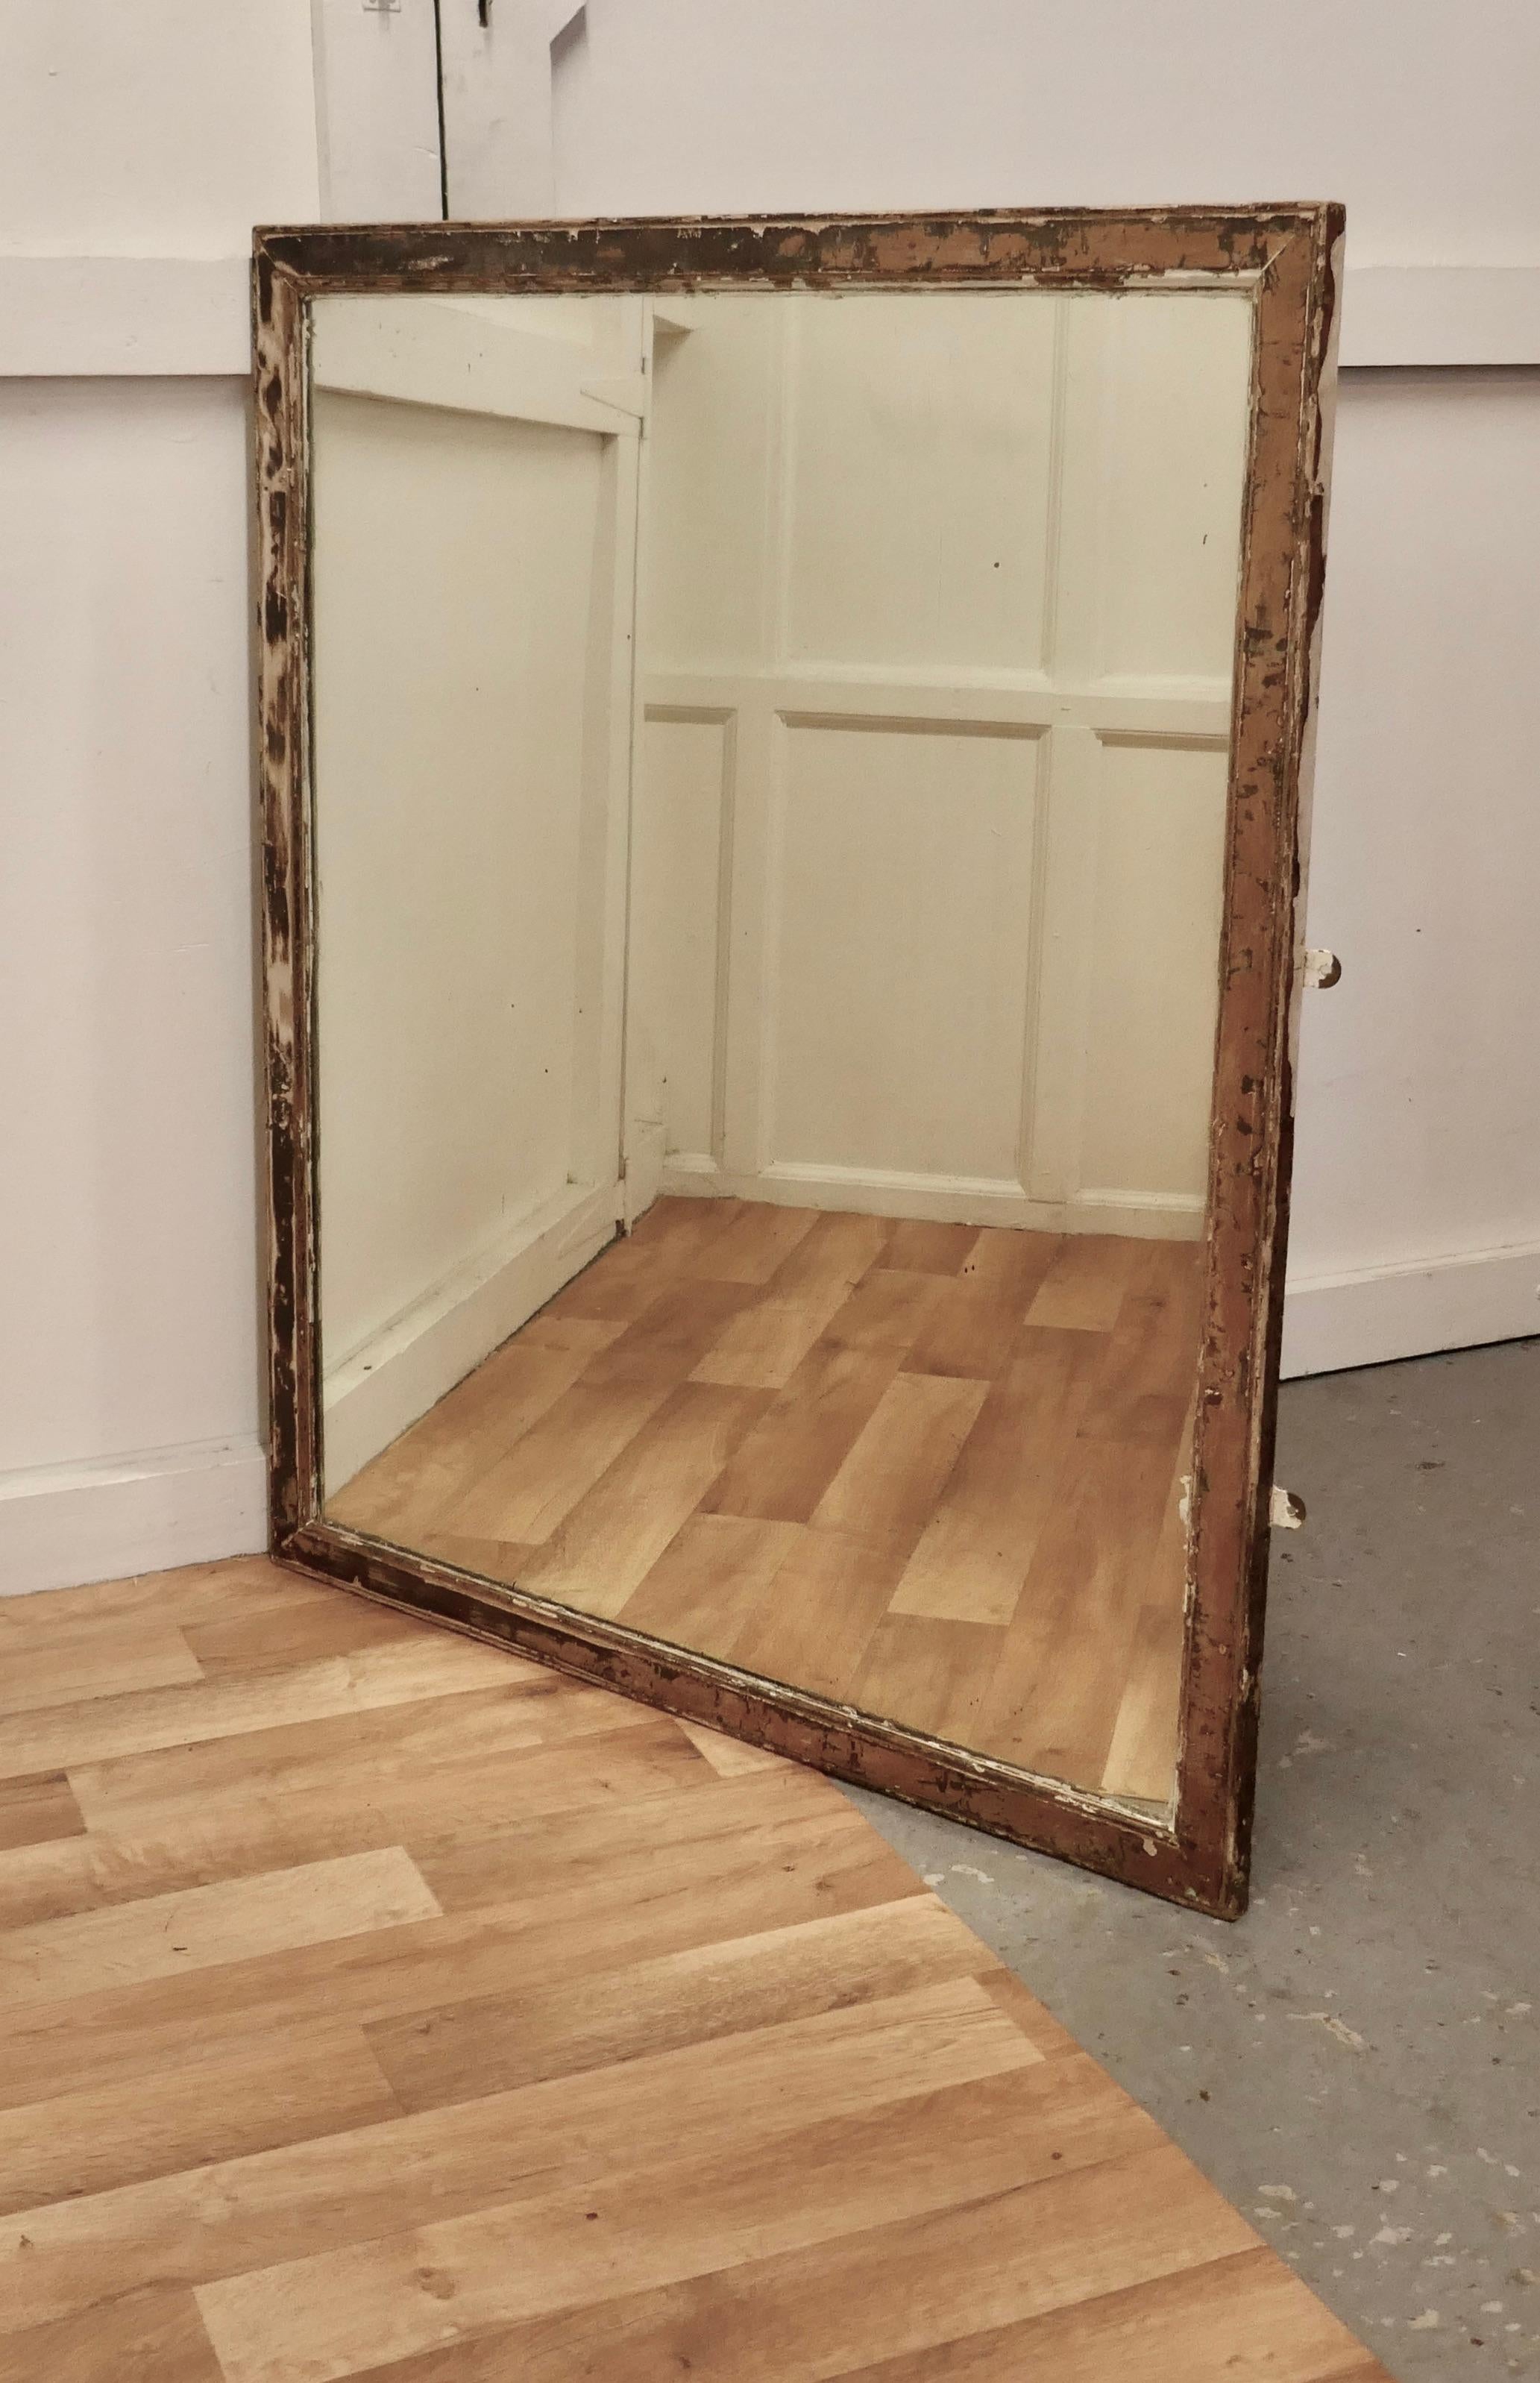 Large heavy Shabby frame wall mirror

This is a charming piece of shabby elegance, the Aged mirror frame is 2” wide and has layers of old paint in various thicknesses 
The old looking glass is entirely original, it has some foxing but this is a